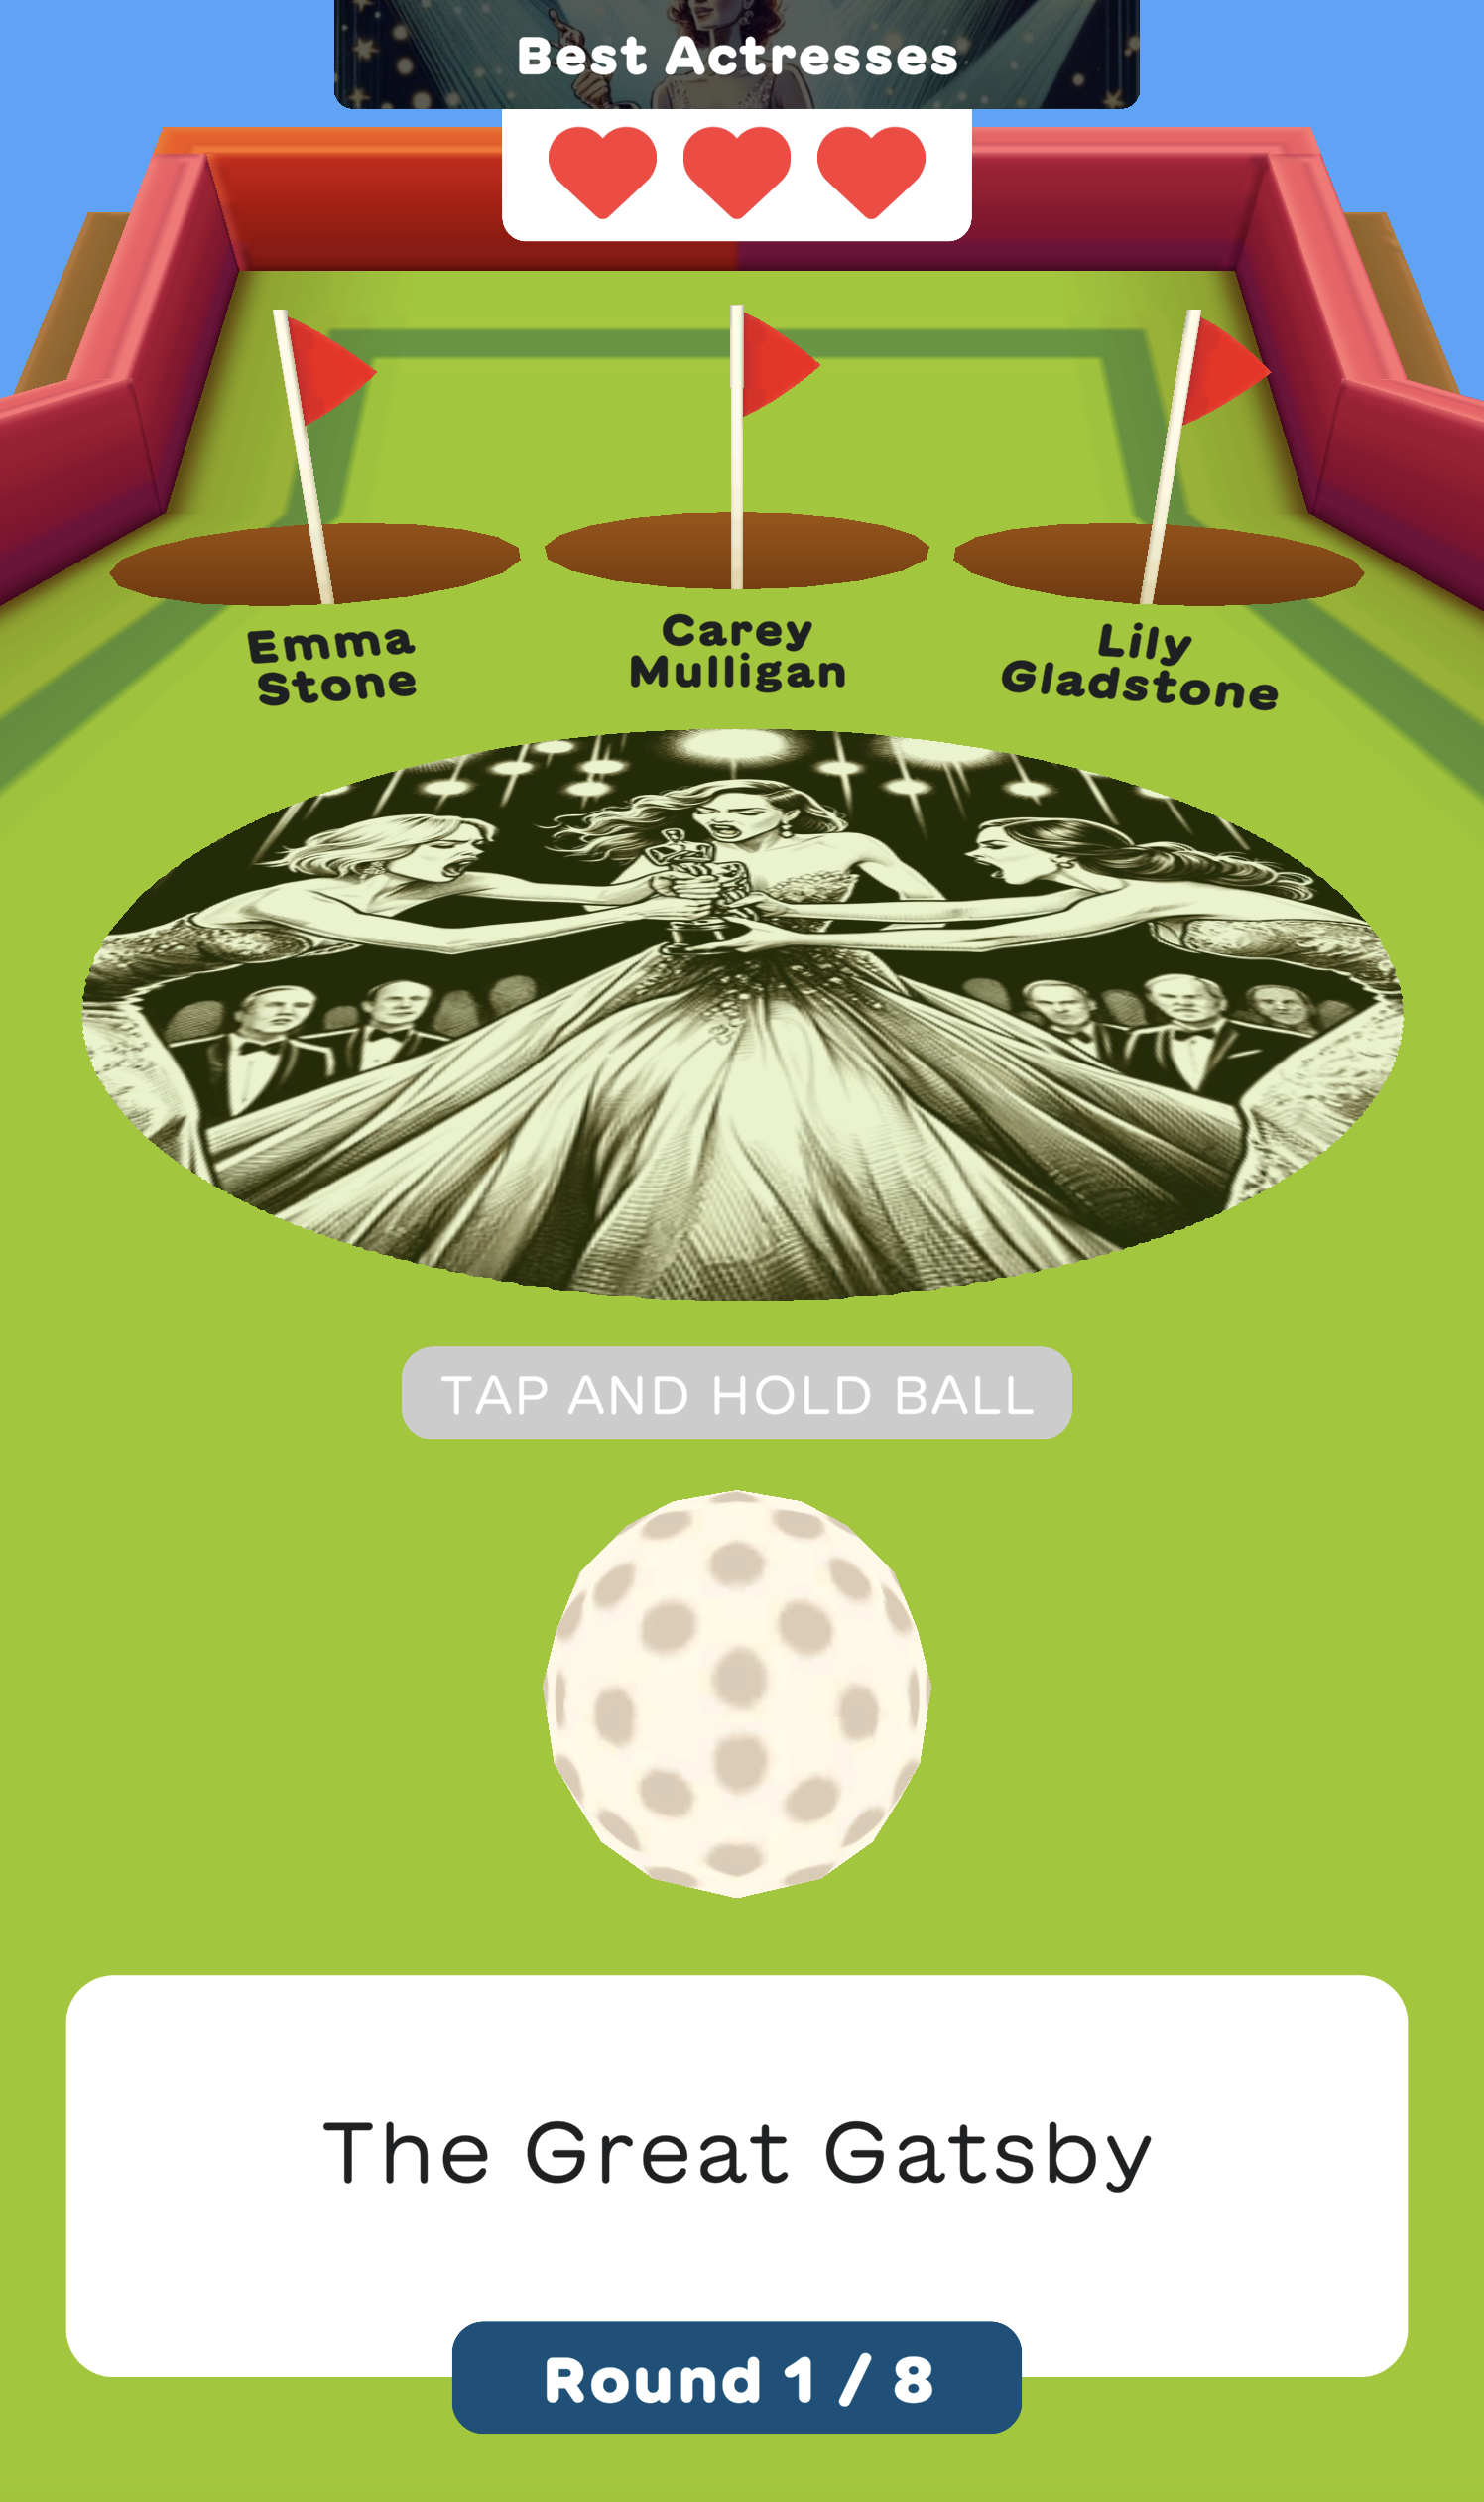 Mobile game screen with a pinball layout featuring &quot;The Great Gatsby,&quot; and options Emma Stone, Carey Mulligan, Lily Gladstone